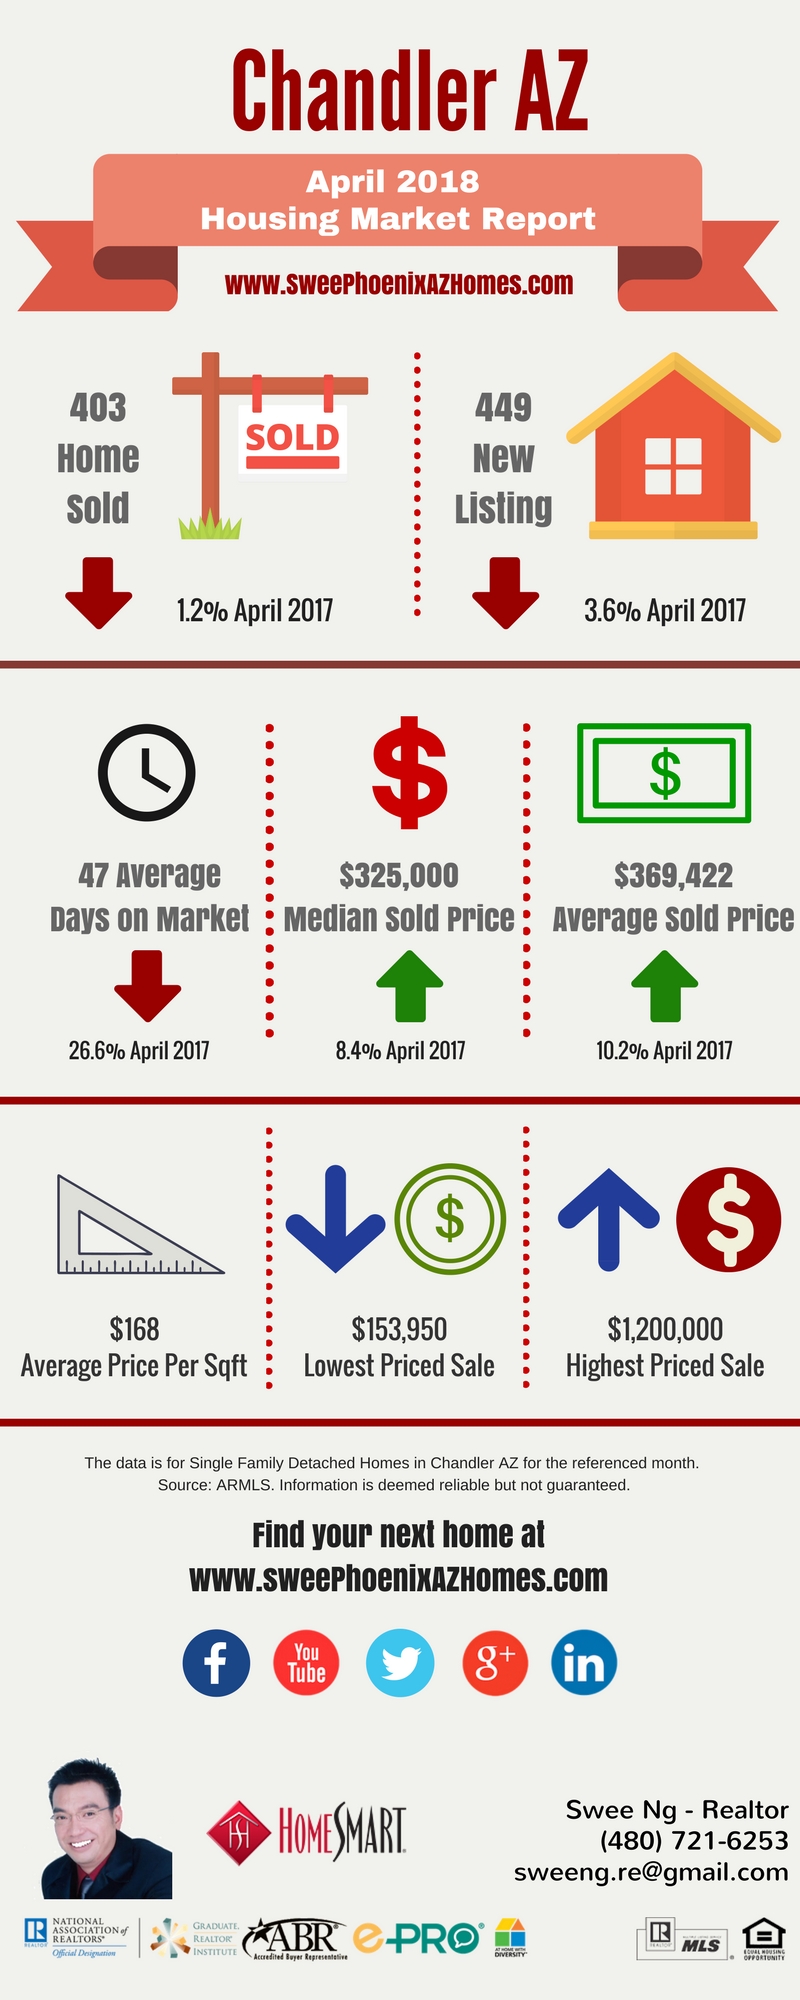 Chandler AZ Housing Market Update April 2018 by Swee Ng, House Value and Real Estate Listings